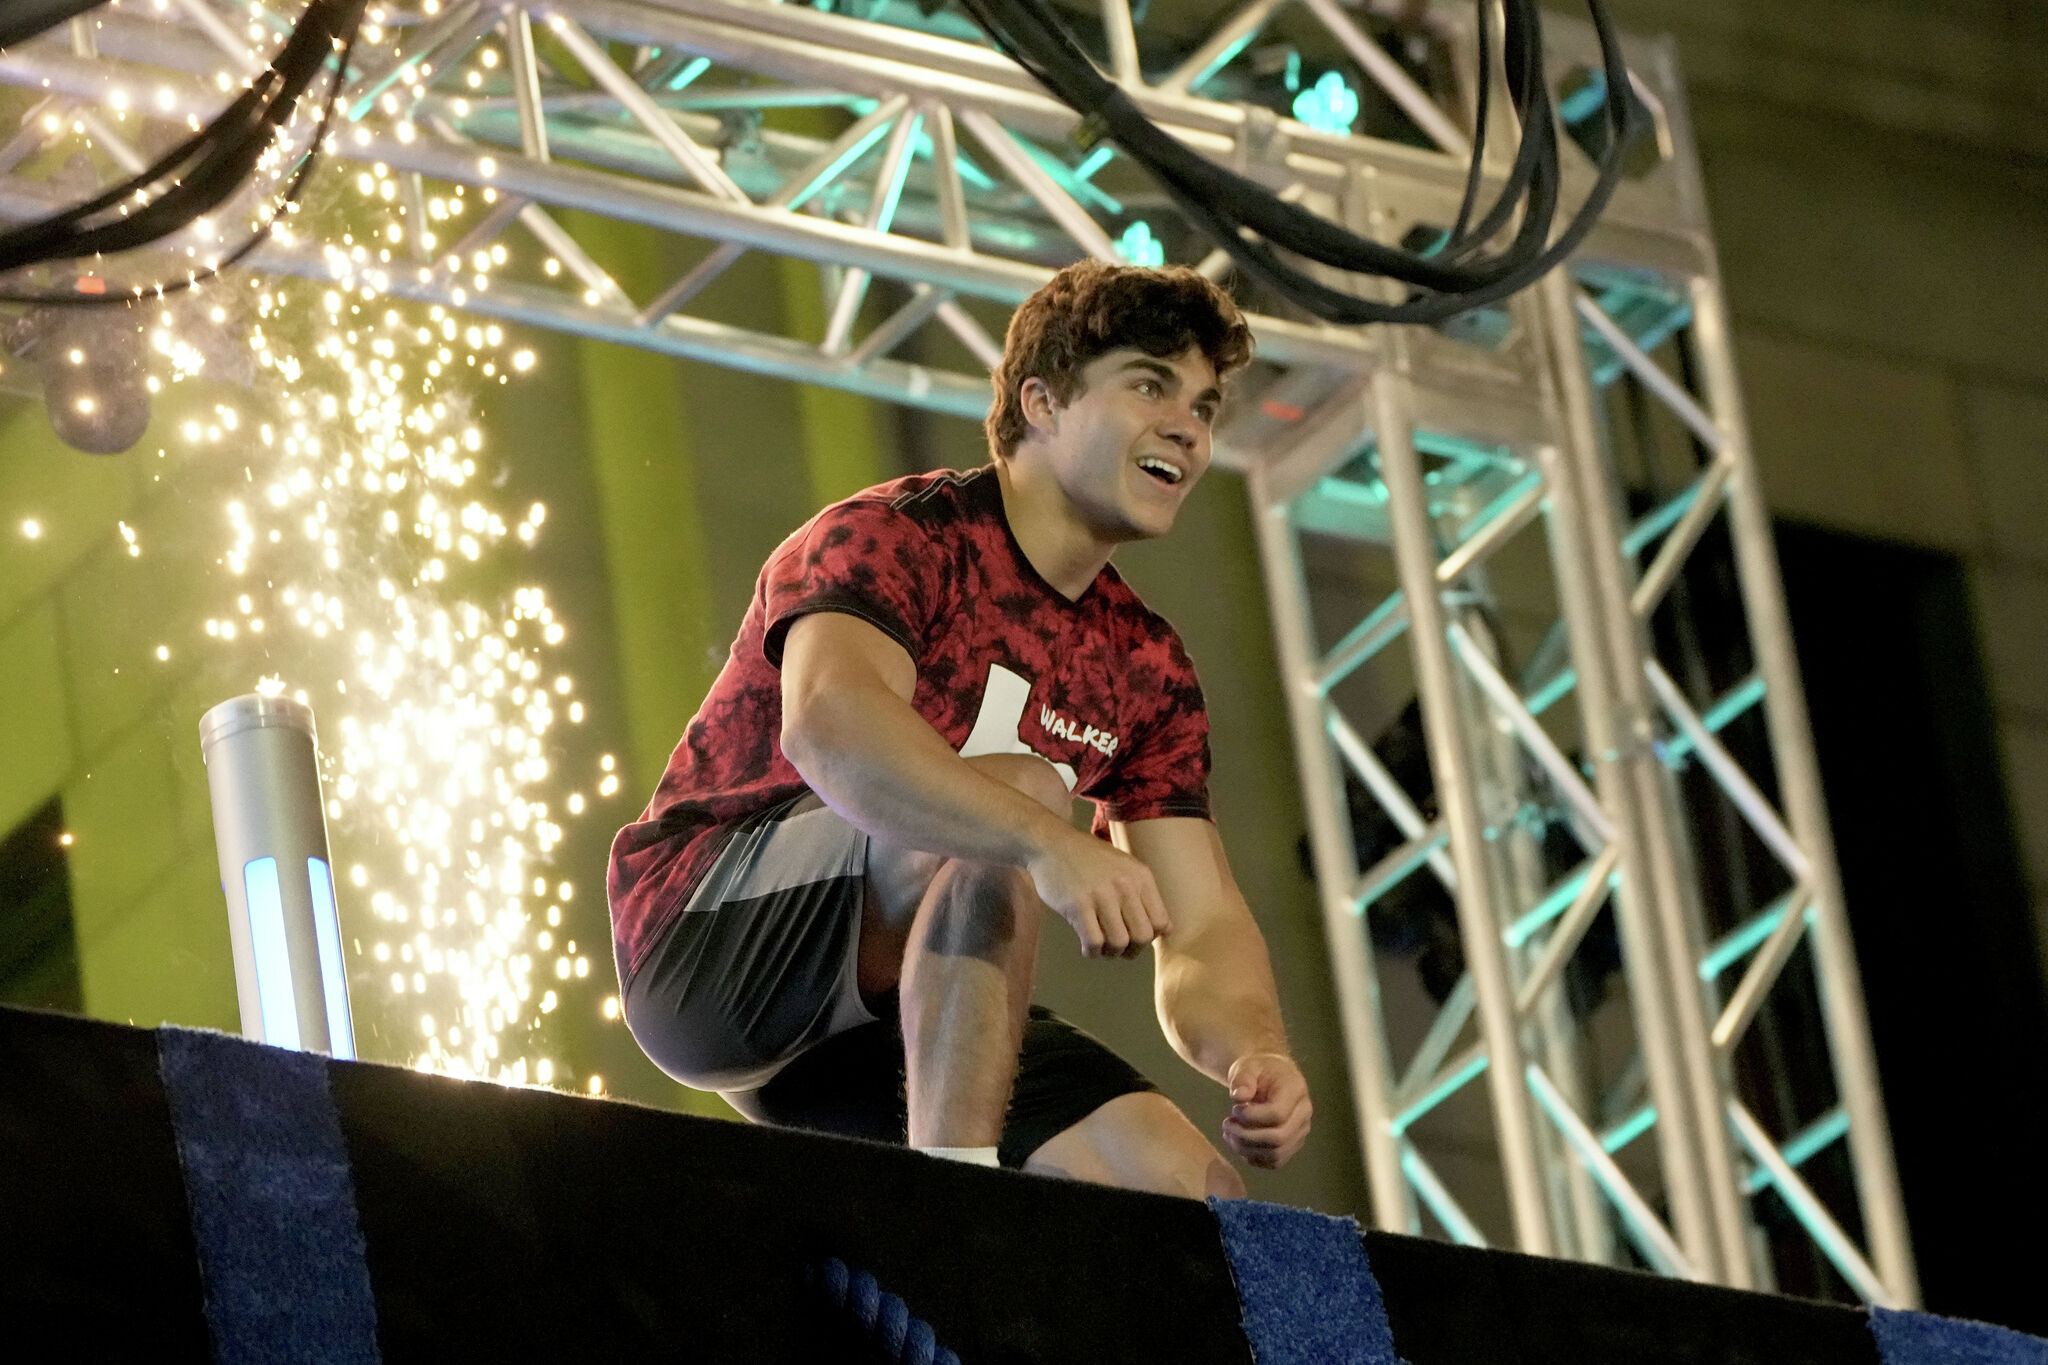 American Ninja Warrior Awards $1 Million Prize to Tampa Competitor with Cerebral Palsy